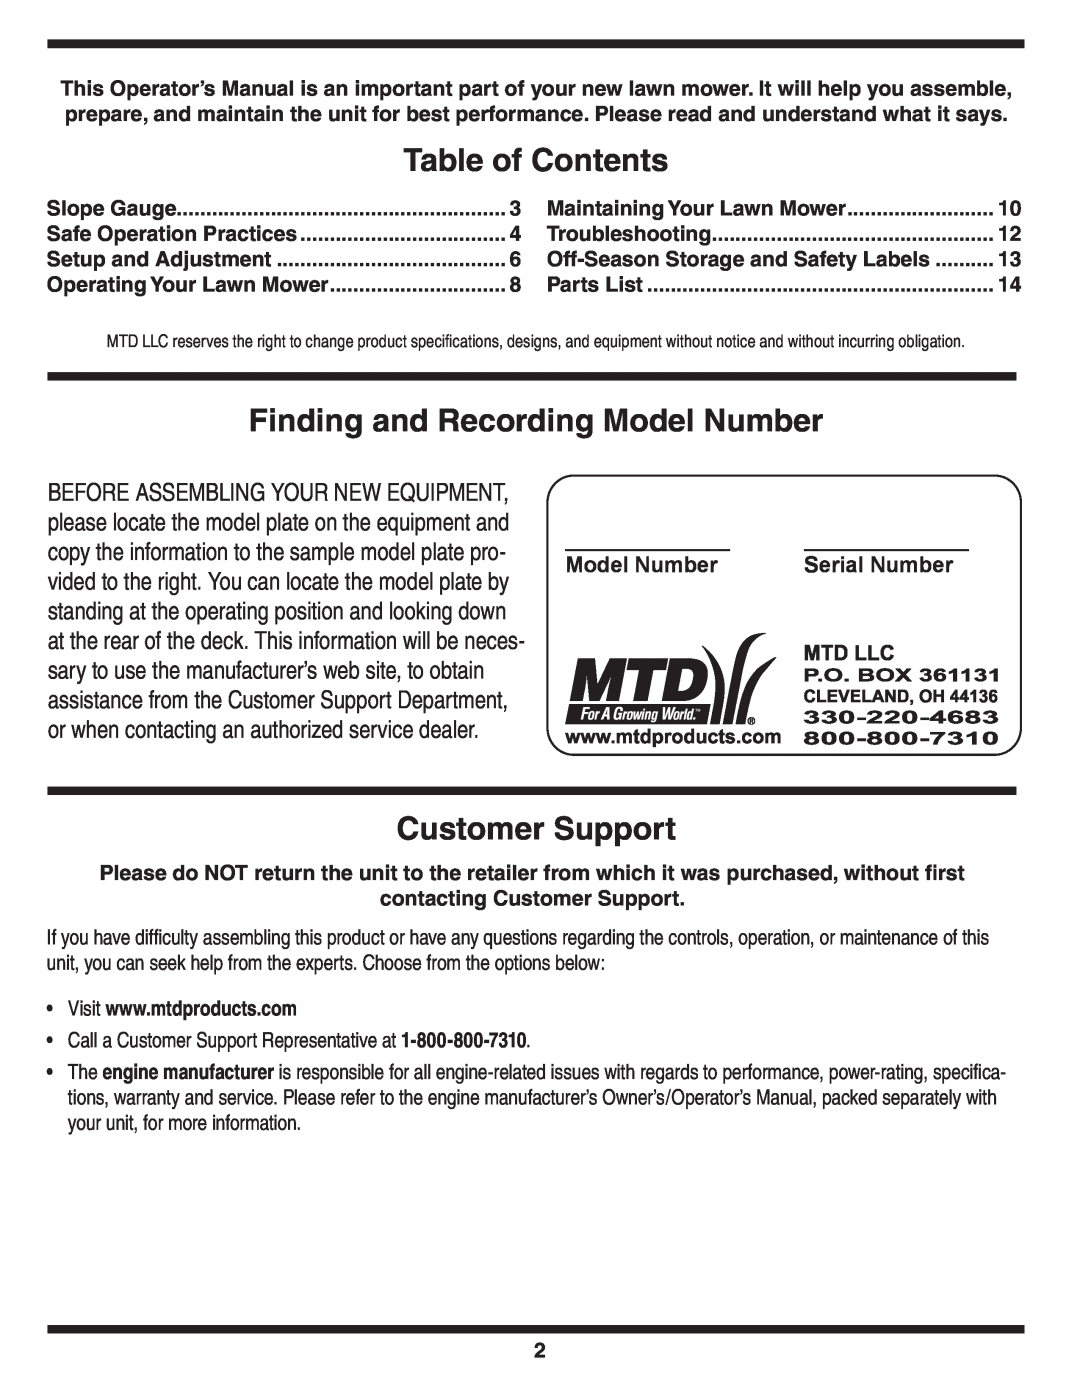 MTD V560 Table of Contents, Finding and Recording Model Number, Customer Support, Before Assembling Your New Equipment 